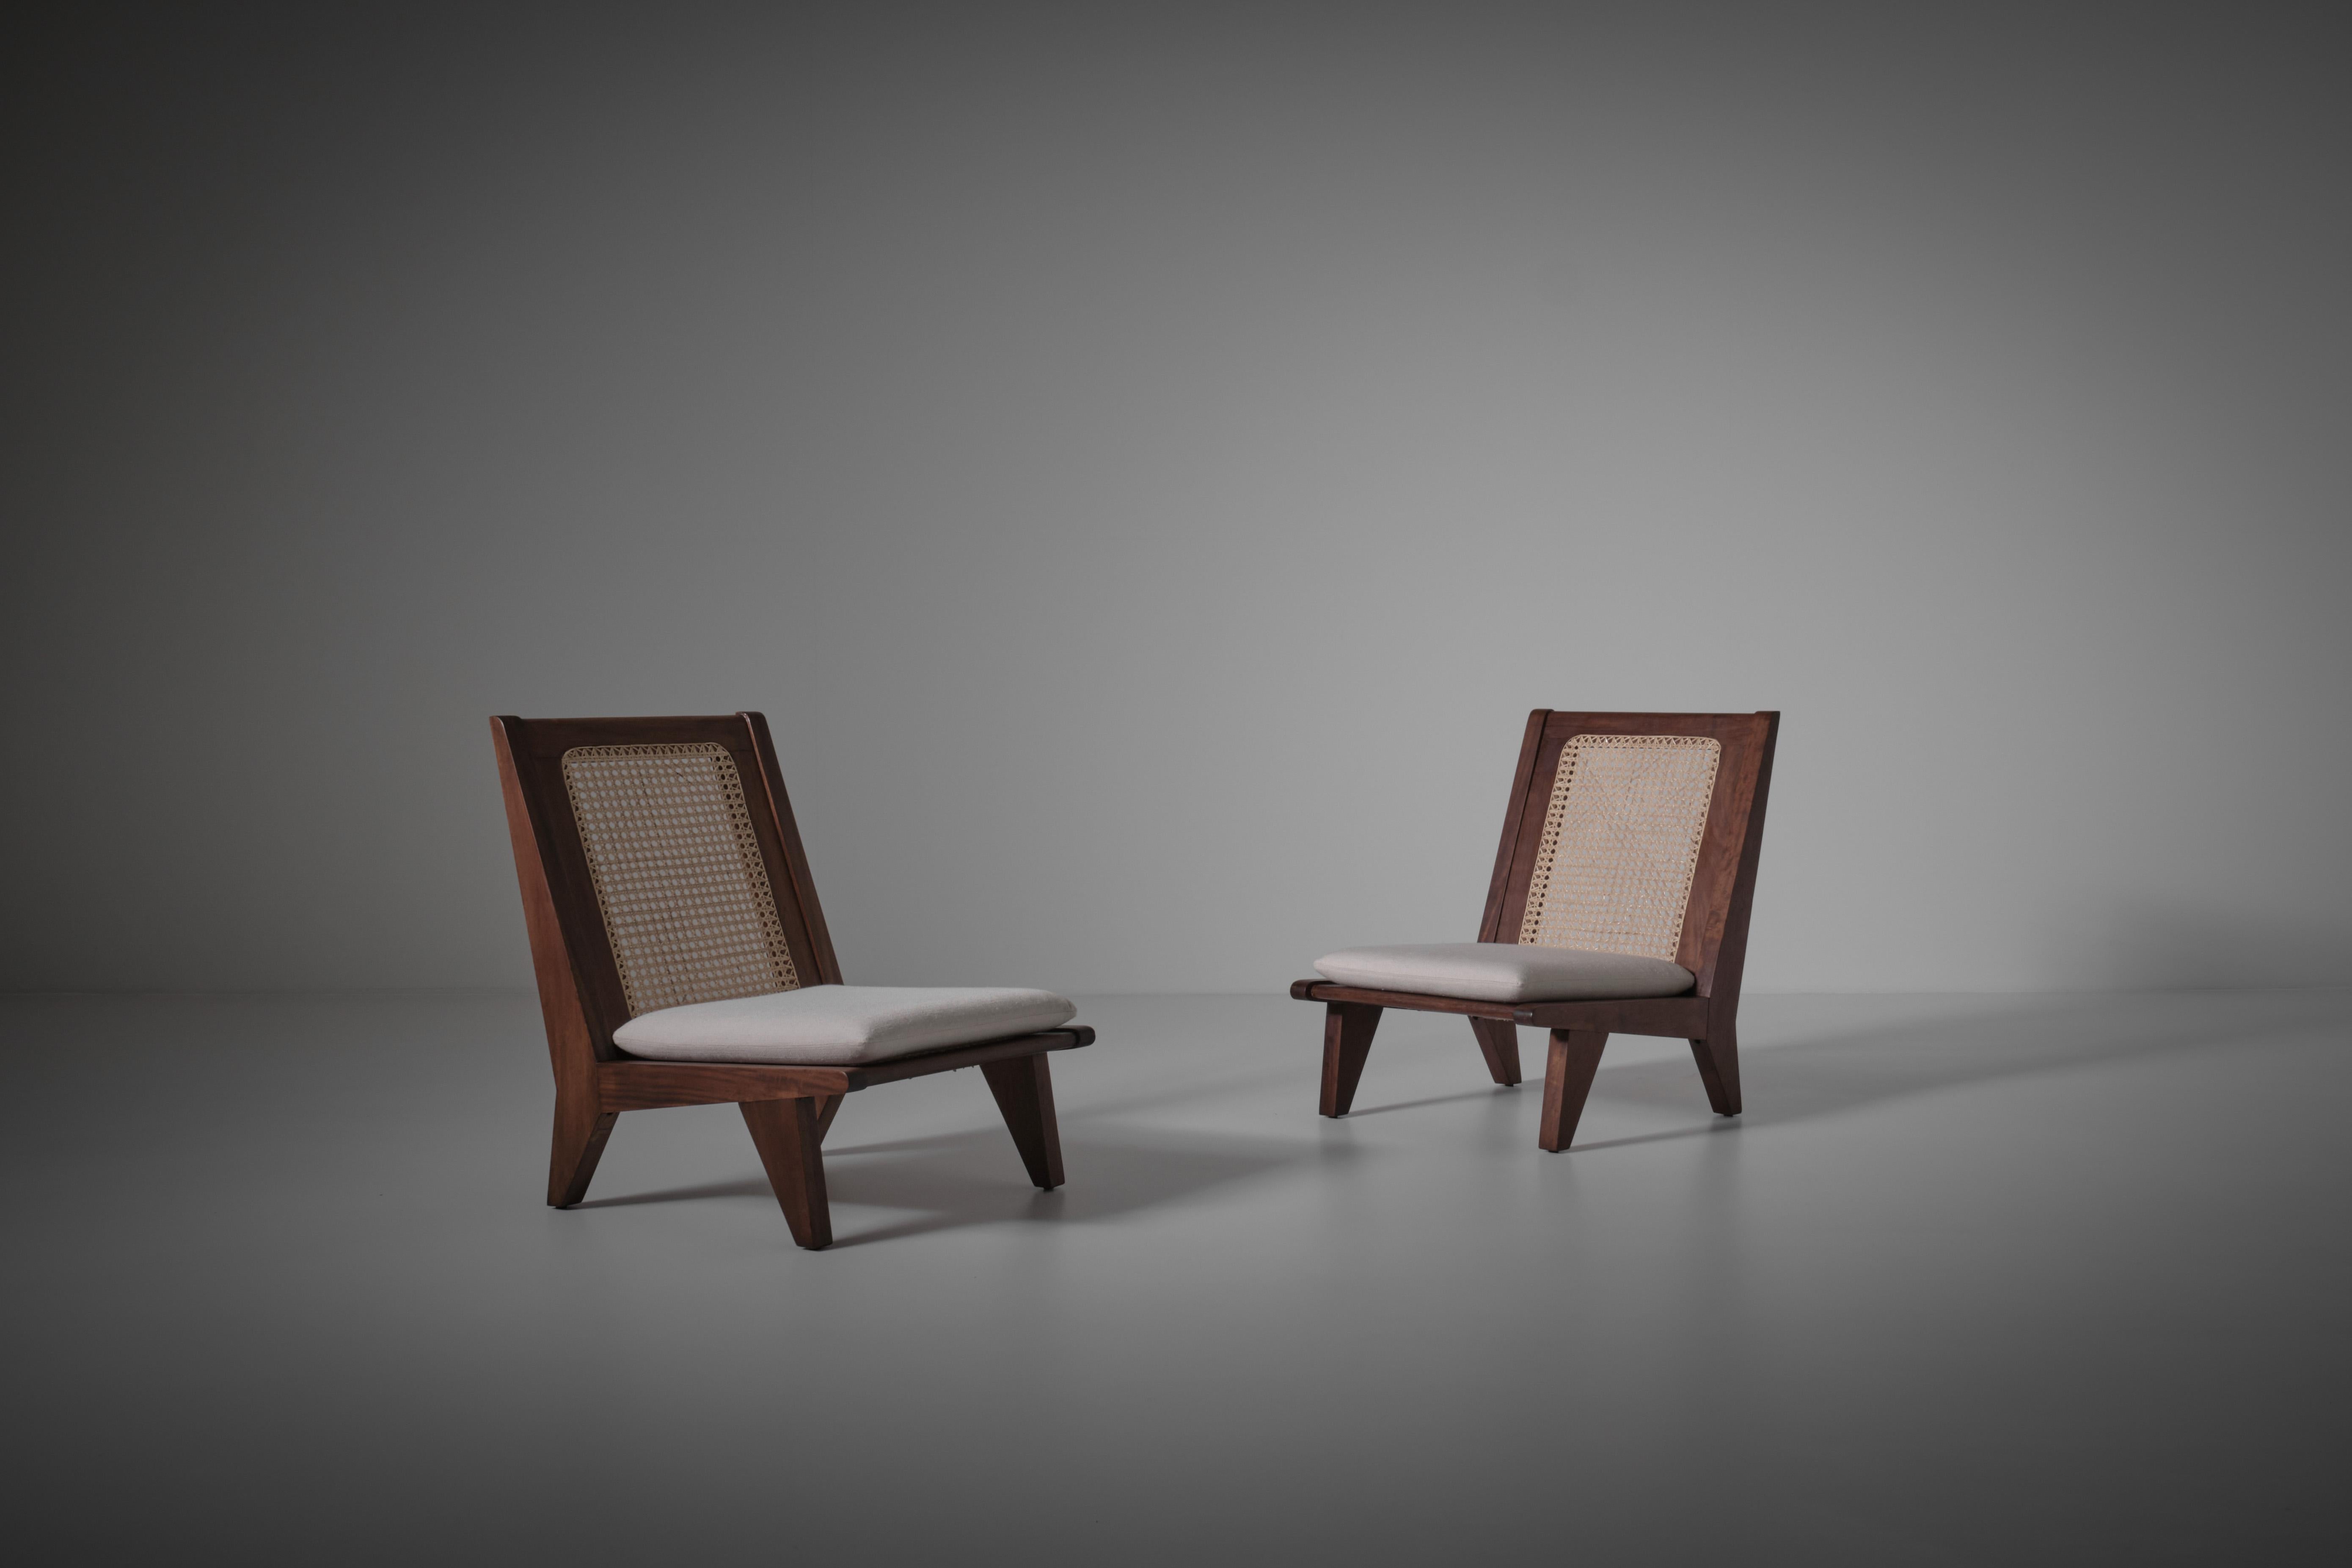 Pair of French easy chairs, France 1950s. Elegant frame made of Mahogany and woven cane back and seat. Cushions are made of a high quality woven natural fabric composed of Viscose (Rayon) and silk from the collection of Dedar. In excellent condition.